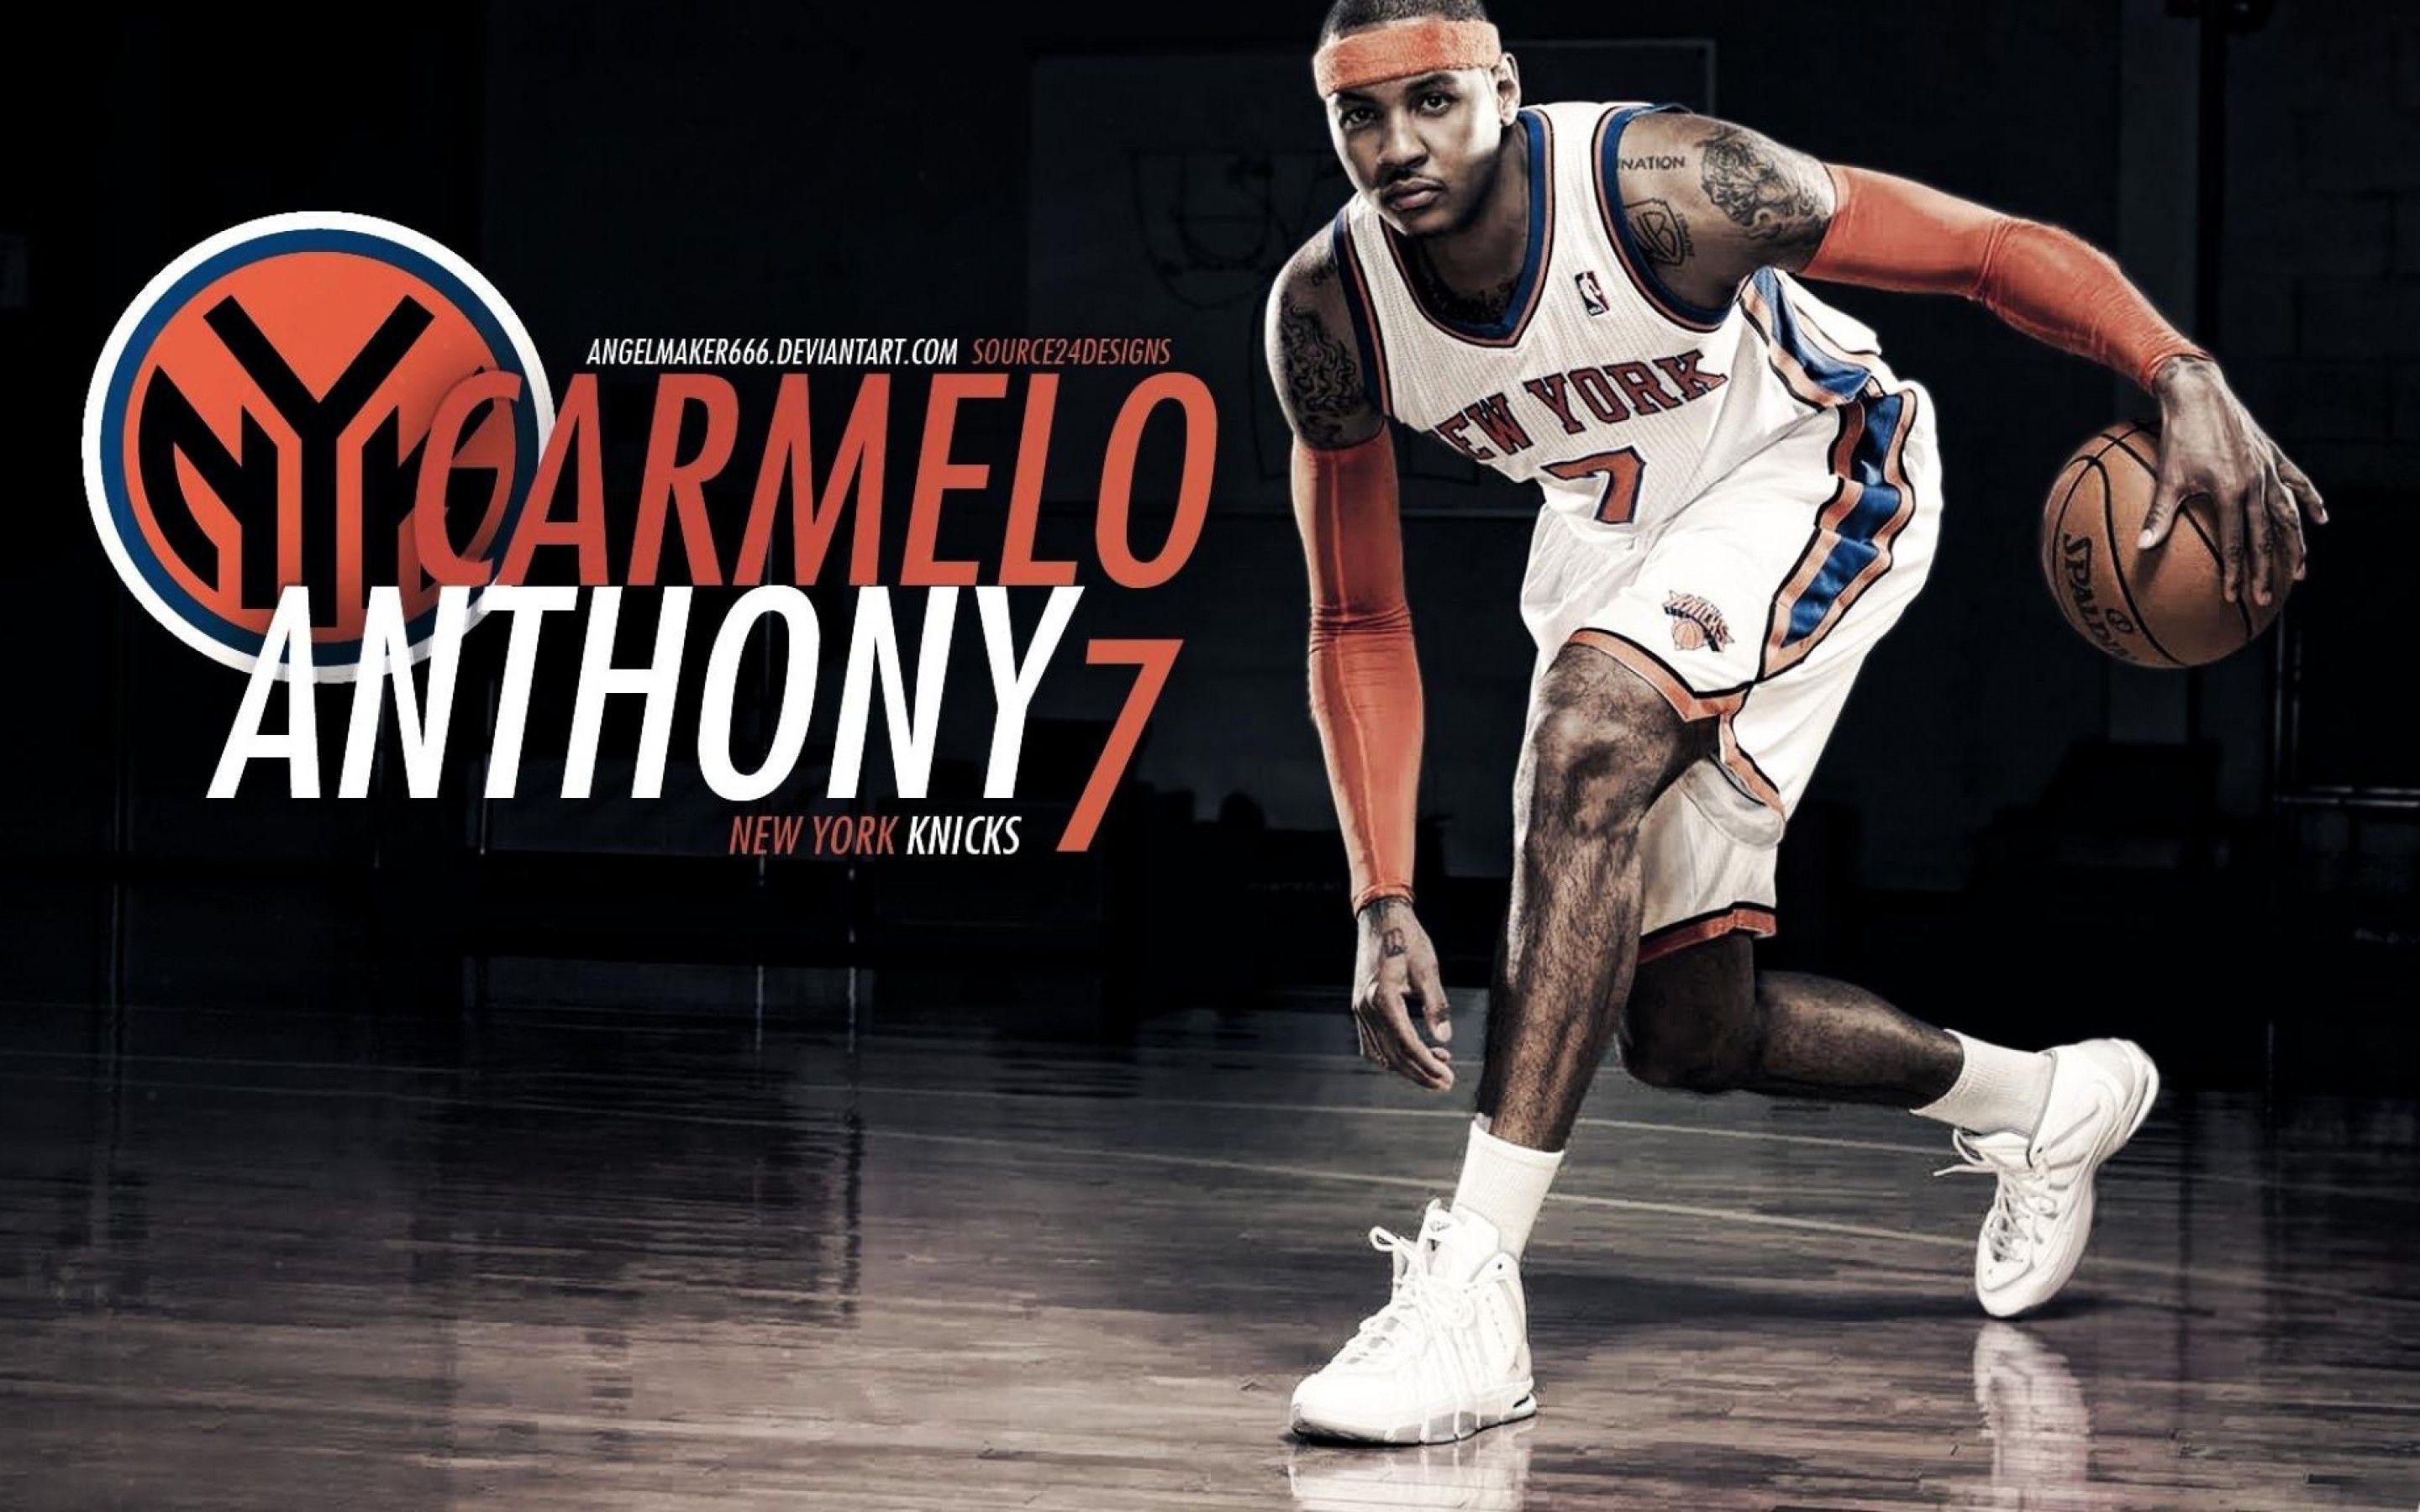 Wallpaper For > Carmelo Anthony Wallpaper iPhone